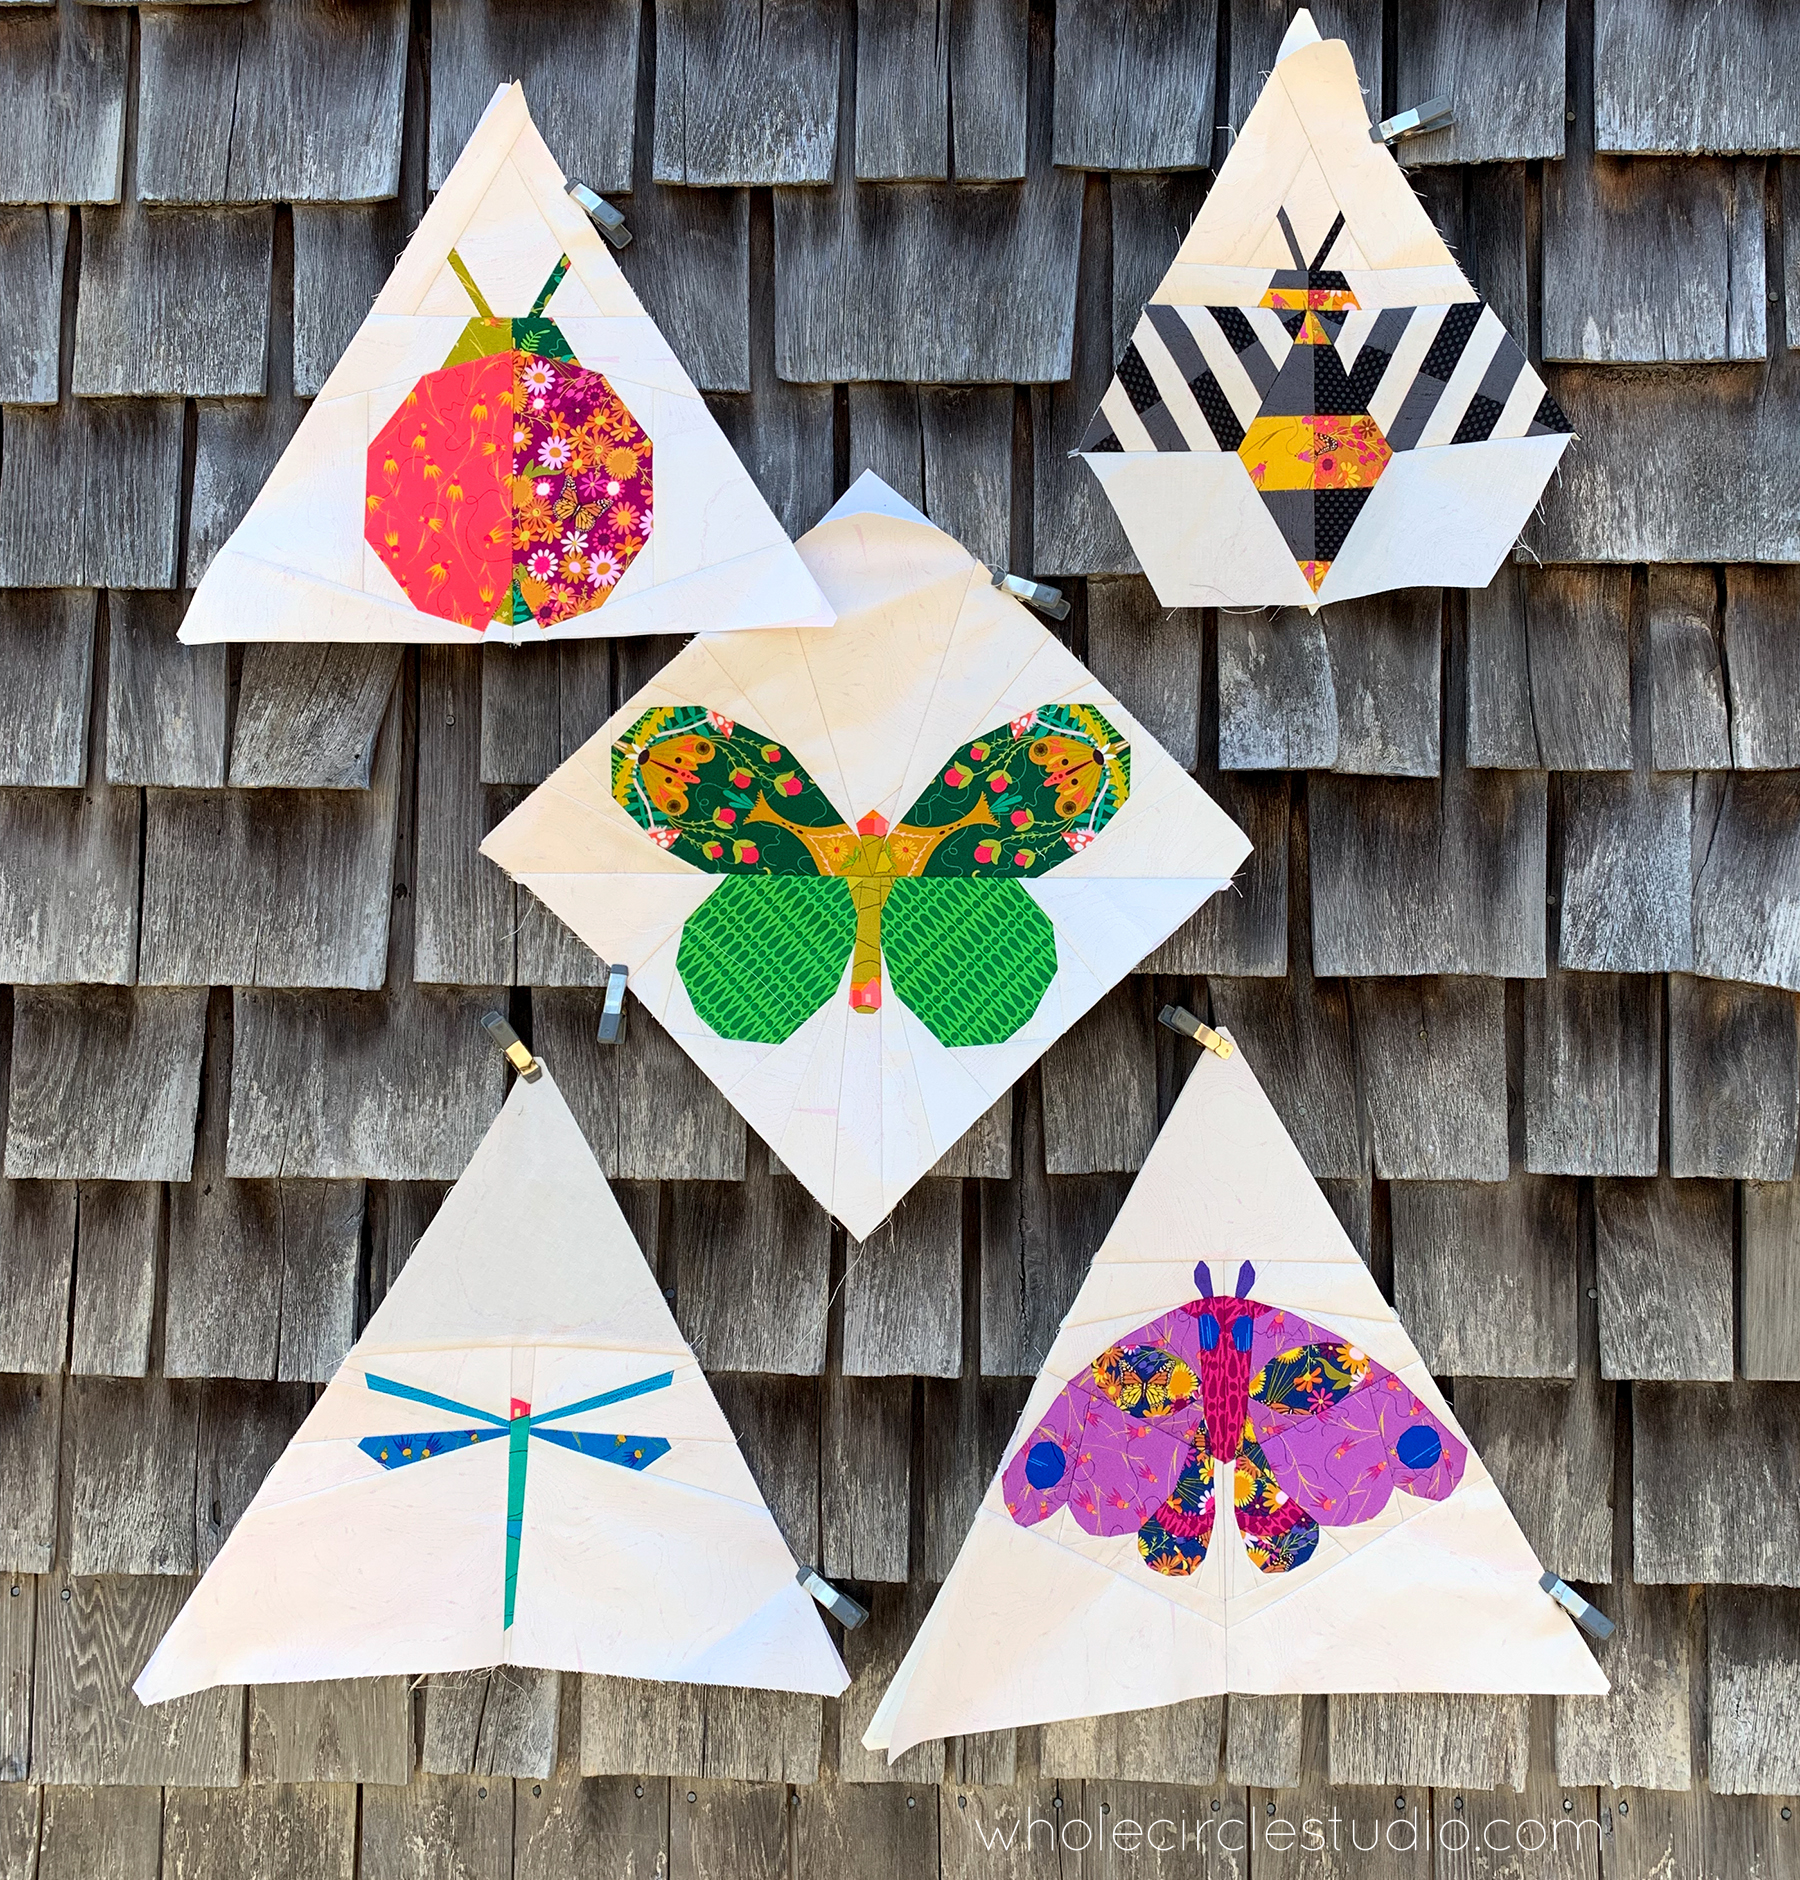 5 quilt blocks of insects